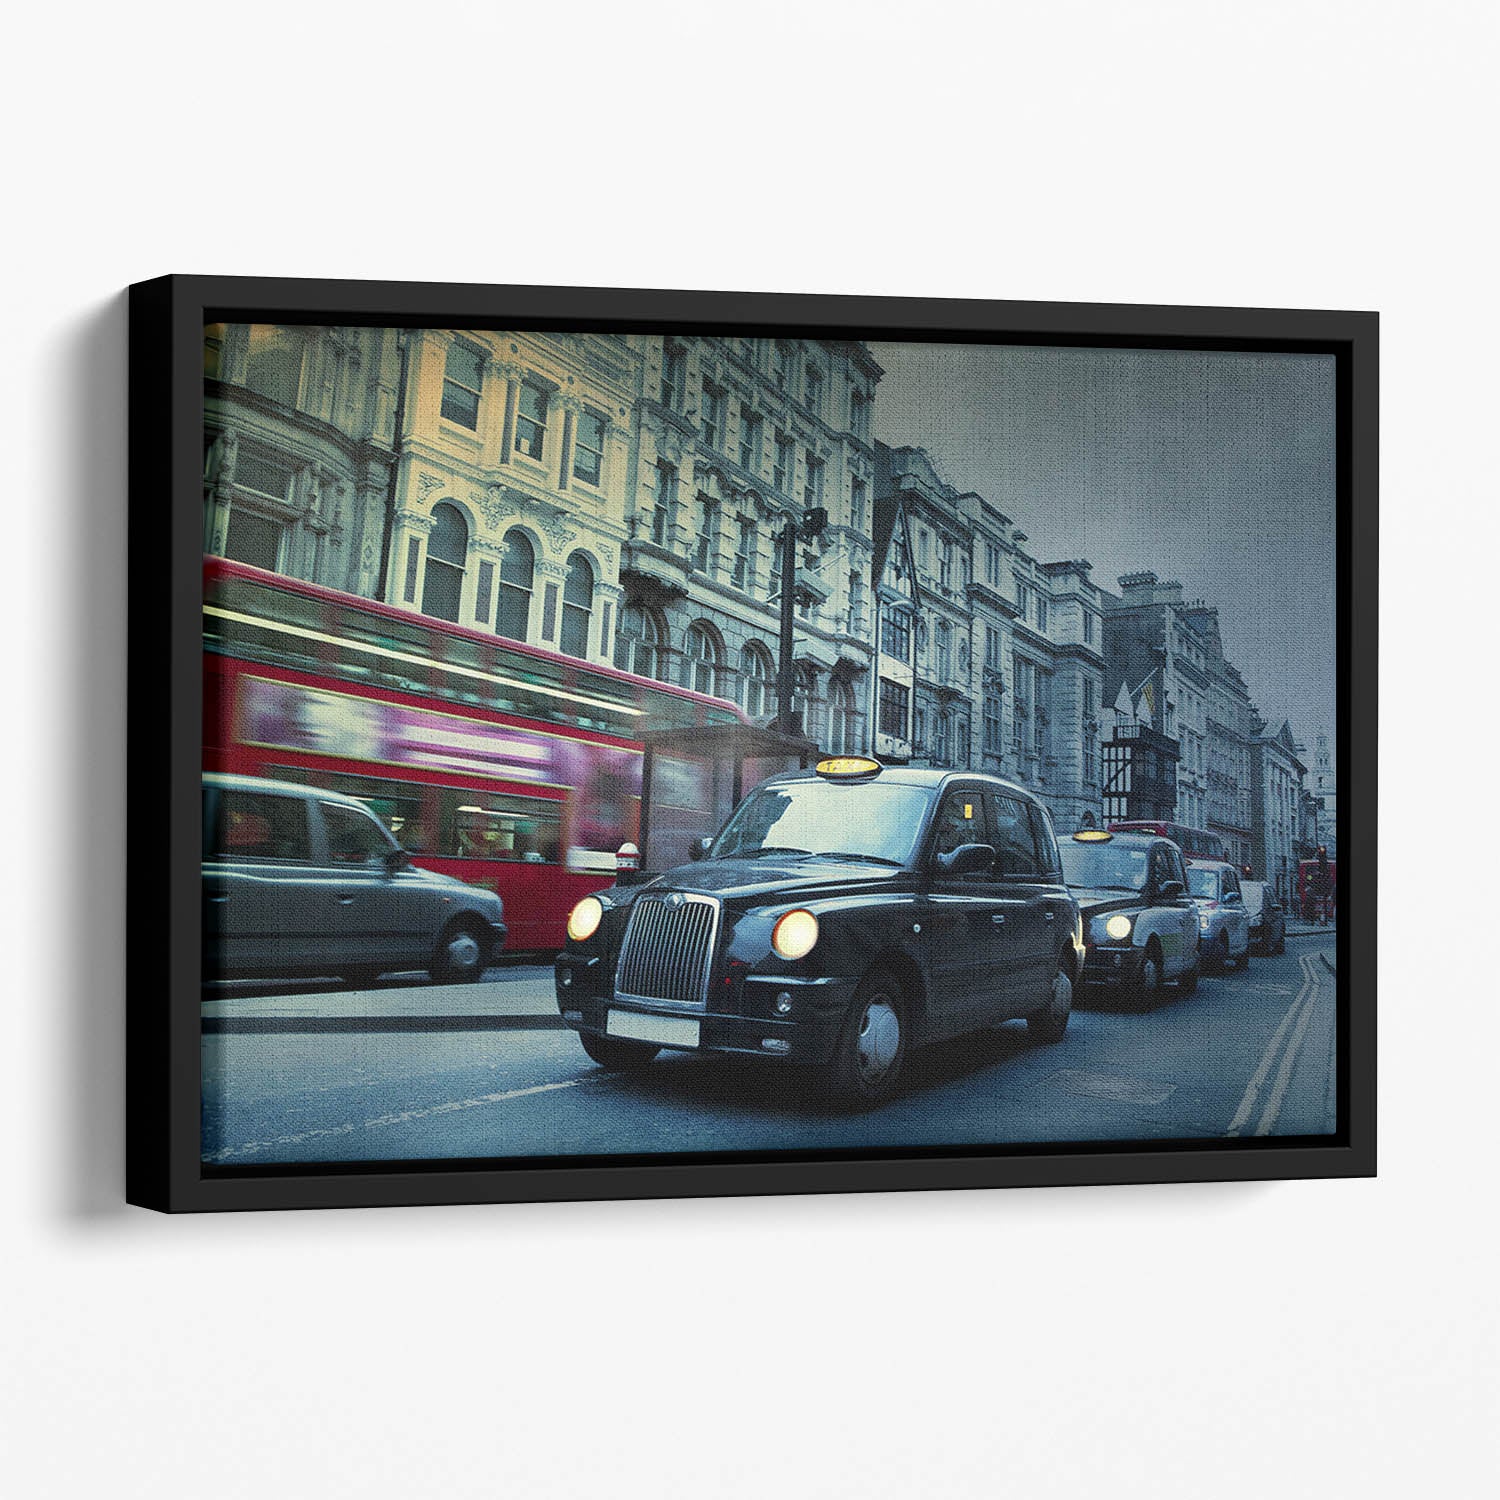 London Street Taxis Floating Framed Canvas